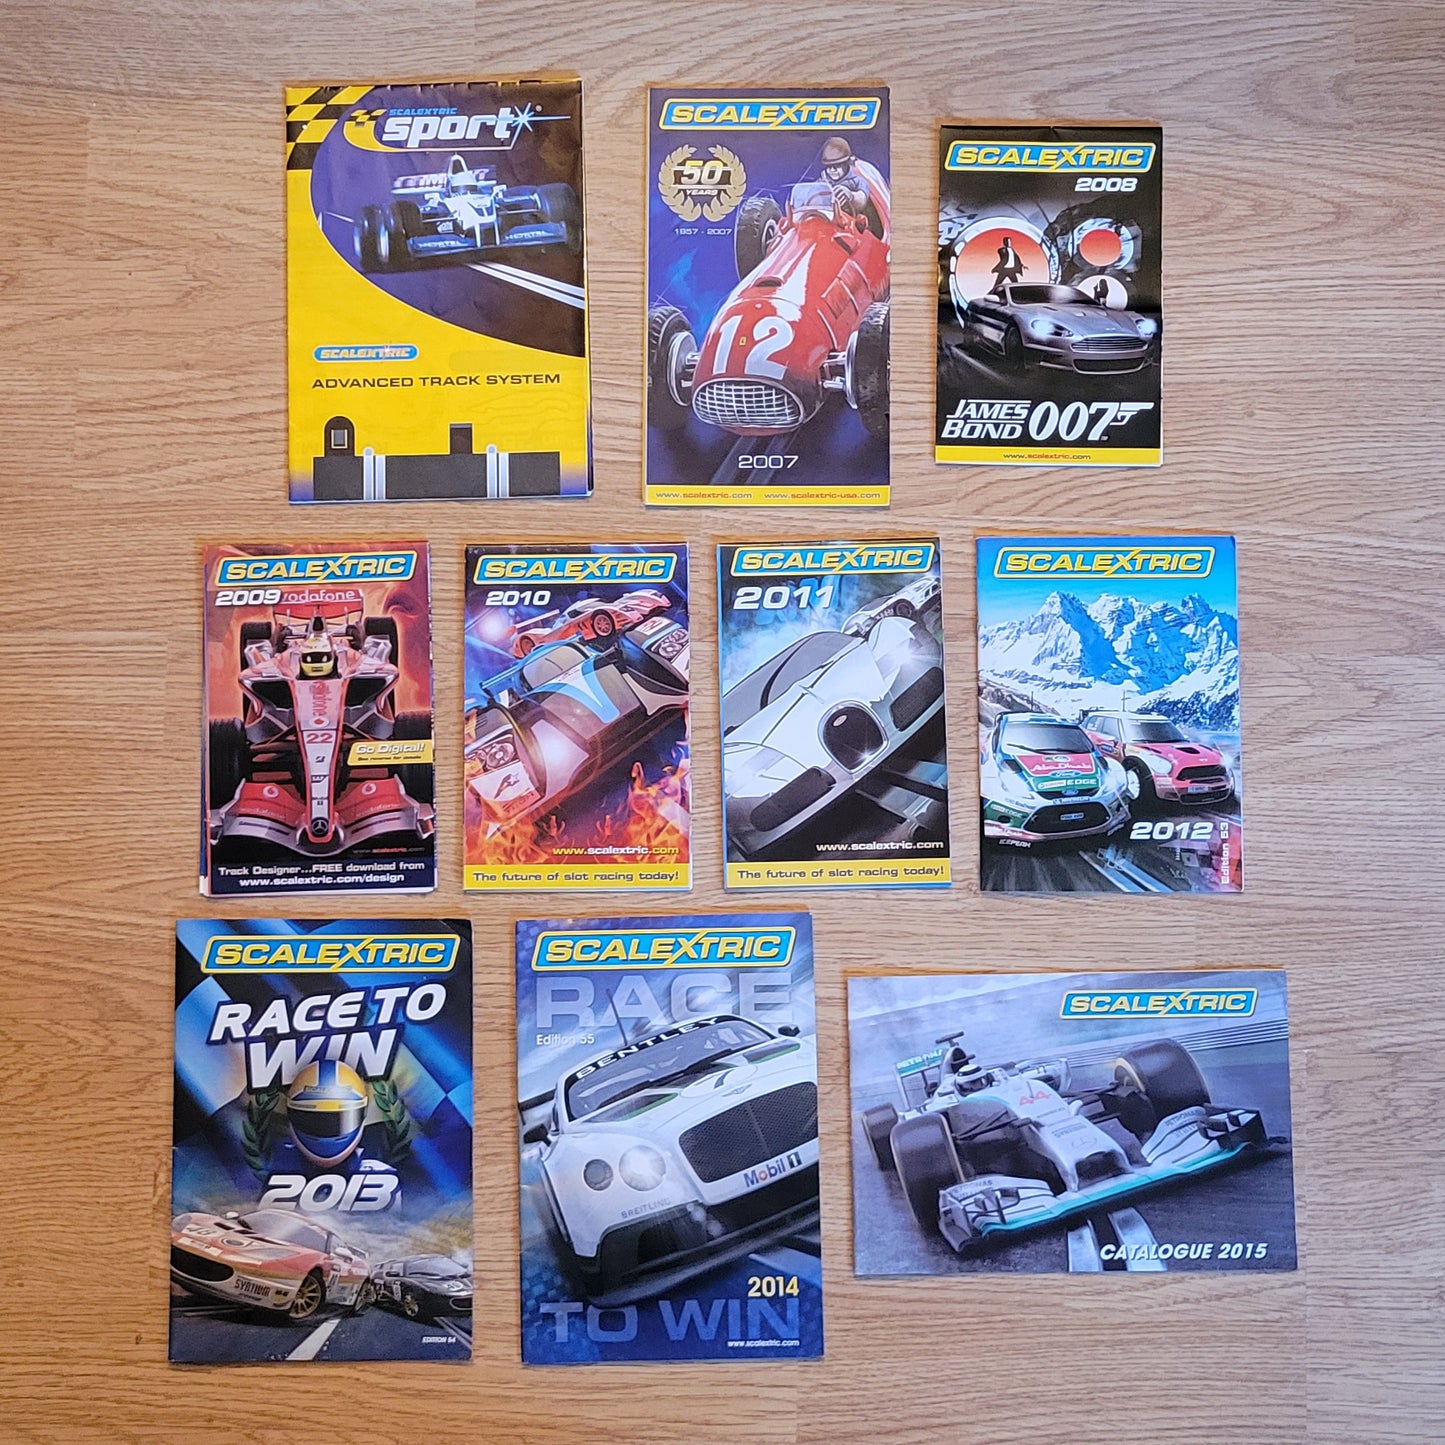 Scalextric Catalogues - 2007 2008 2009 2010 2011 2012 2013 2014 2015